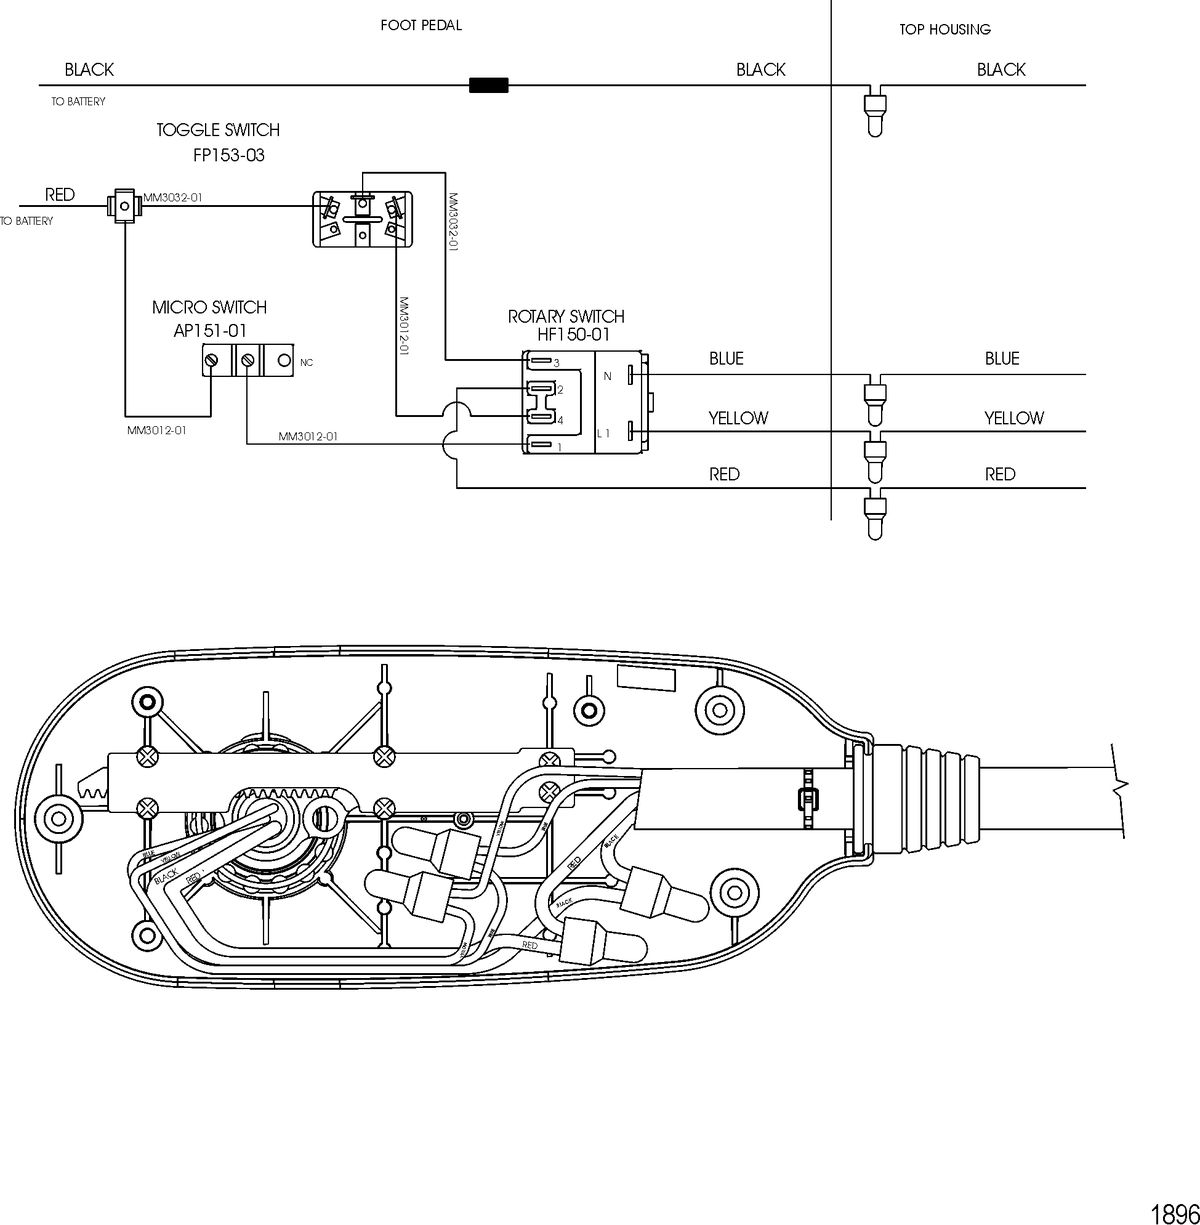 TROLLING MOTOR MOTORGUIDE PRO AND TRACKER SERIES Wire Diagram(Model Pro 54) (12 Volt)